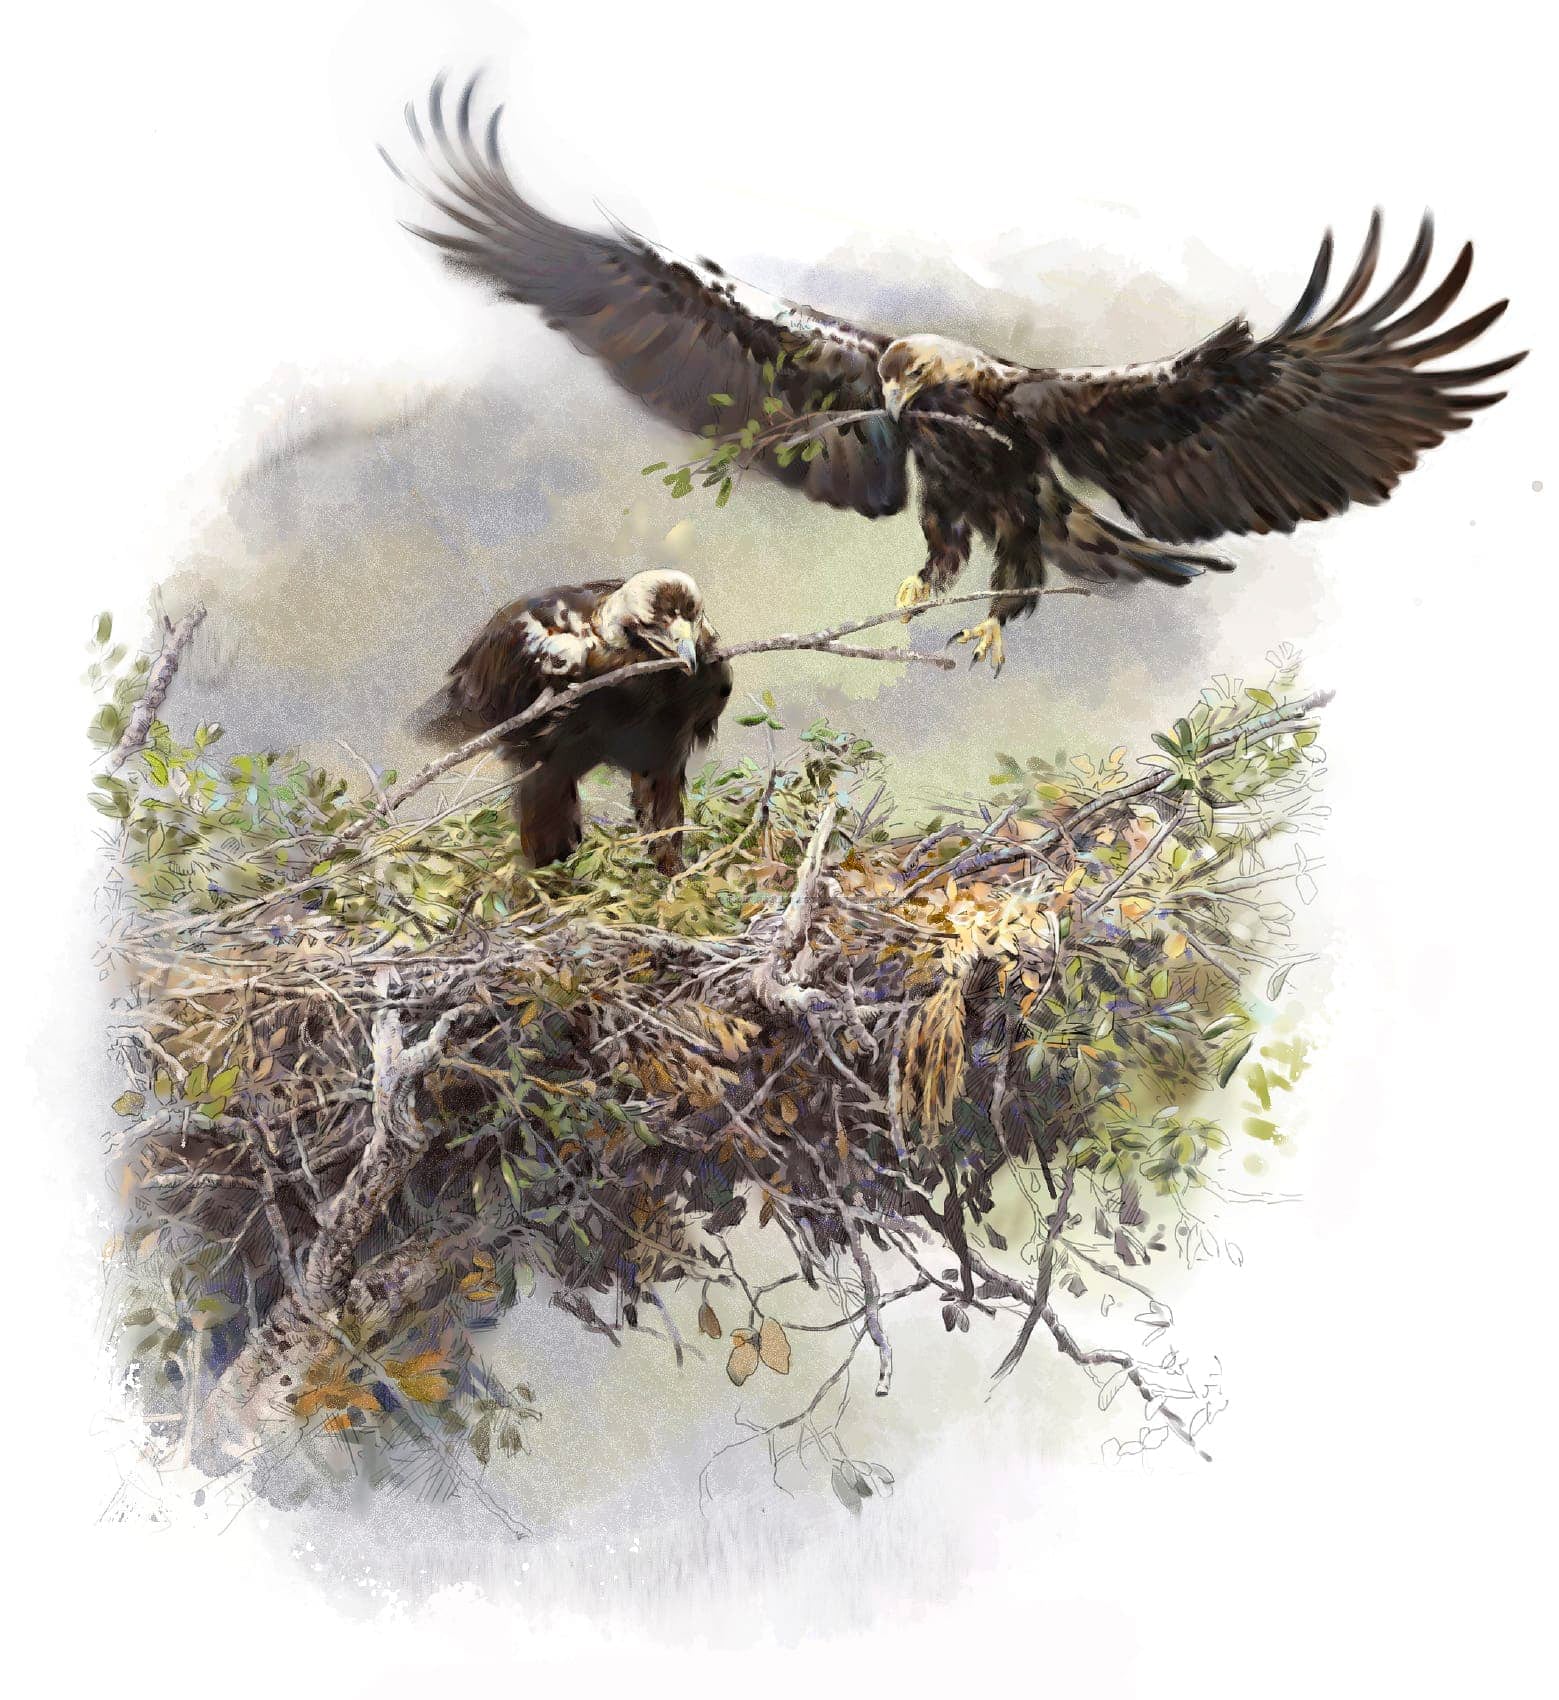 Imperial Eagle in the nest, painting